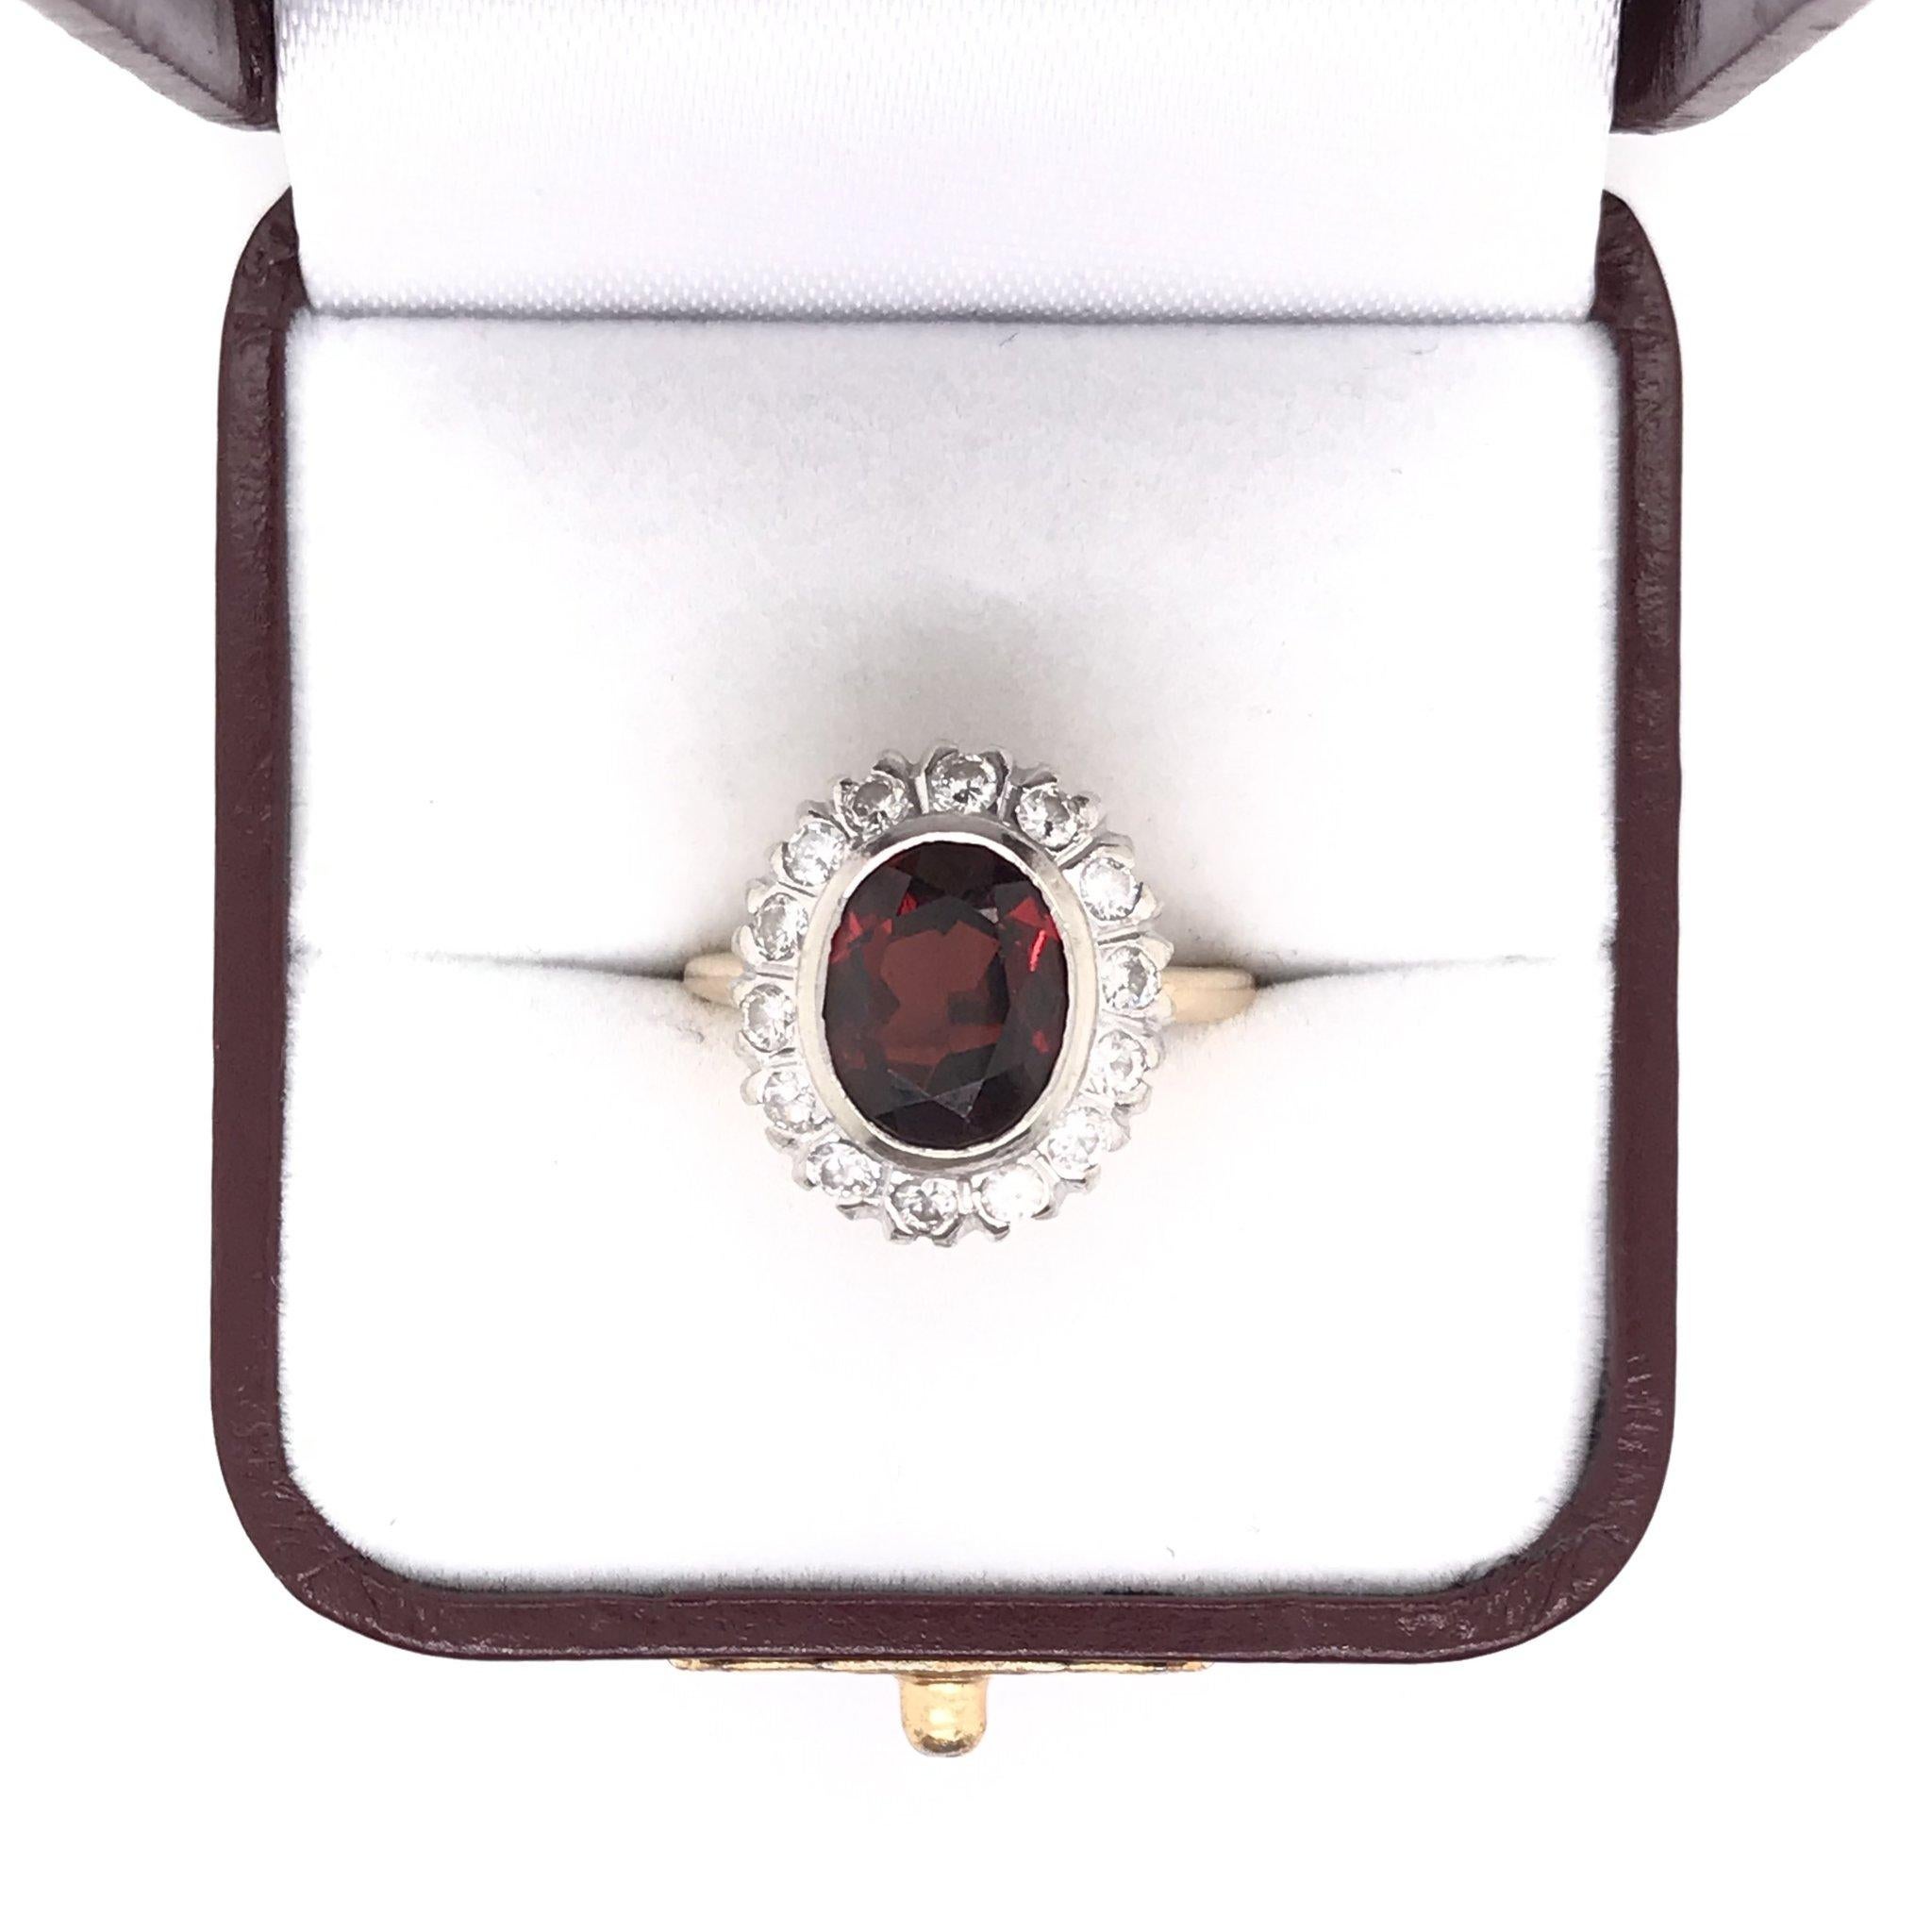 This garnet ring was crafted sometime during the Mid Century design period ( 1940-1960 ). The center stone is a garnet measuring approximately 2.50 carats. The garnet is the traditional reddish brown hue and has a gorgeous saturation. The center